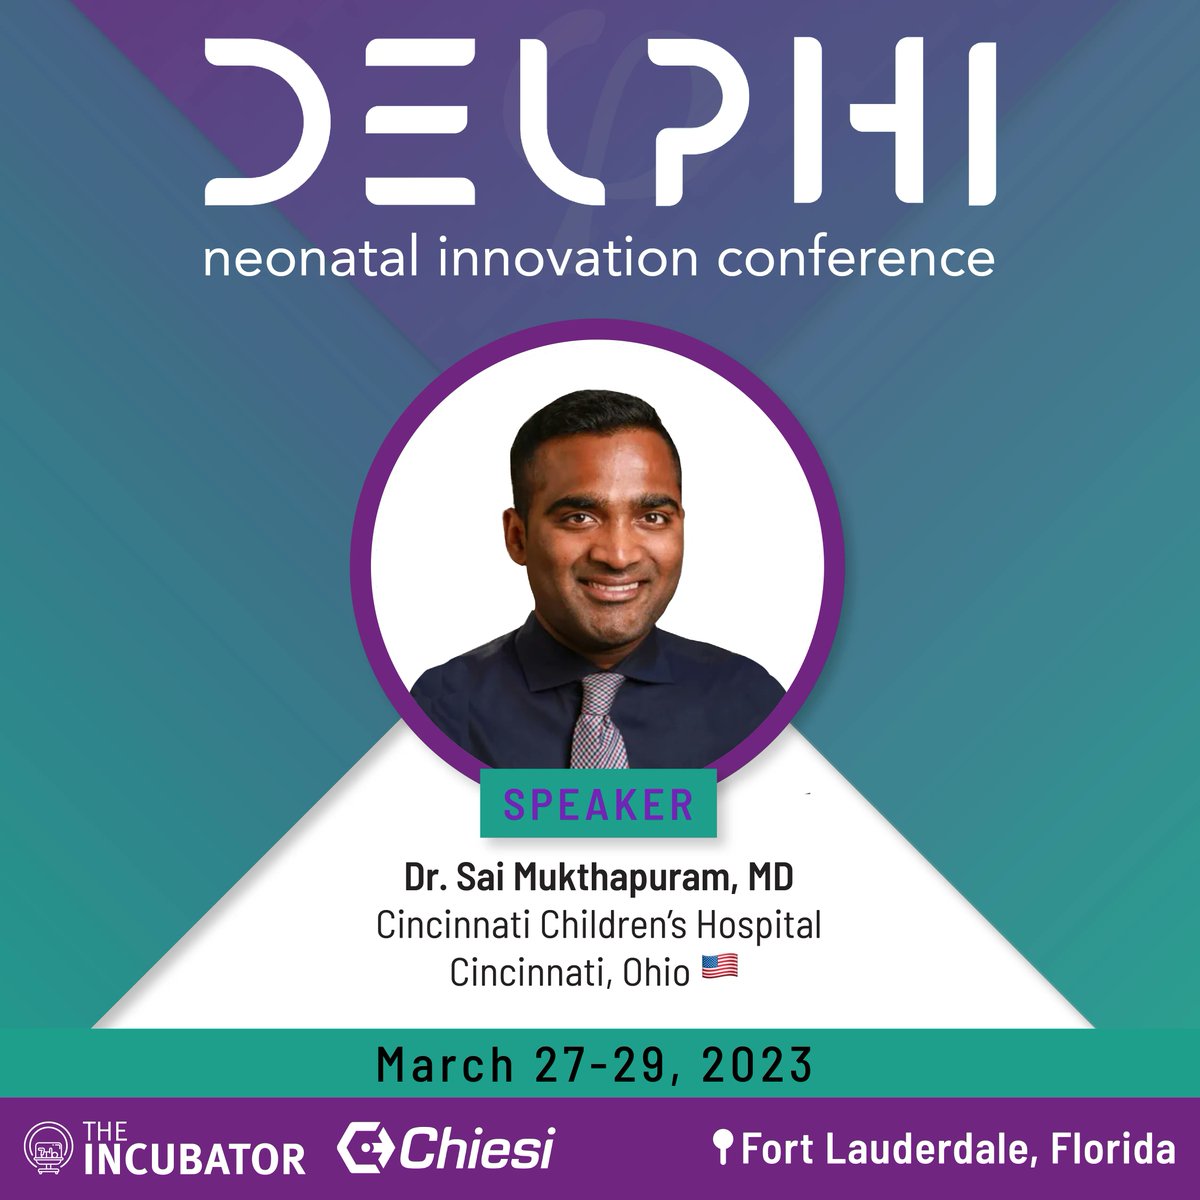 Join us on March 27-29 for Delphi. Dr. Sai Mukthapuram will be joining us from Cincinnati Children's Hospital to speak about BPD lung and Advances in Neonatal Chest MRIs. Registration: buff.ly/3XJXXSC #Neonatal #NeoTwitter #PedsICU #NICU #Preemies